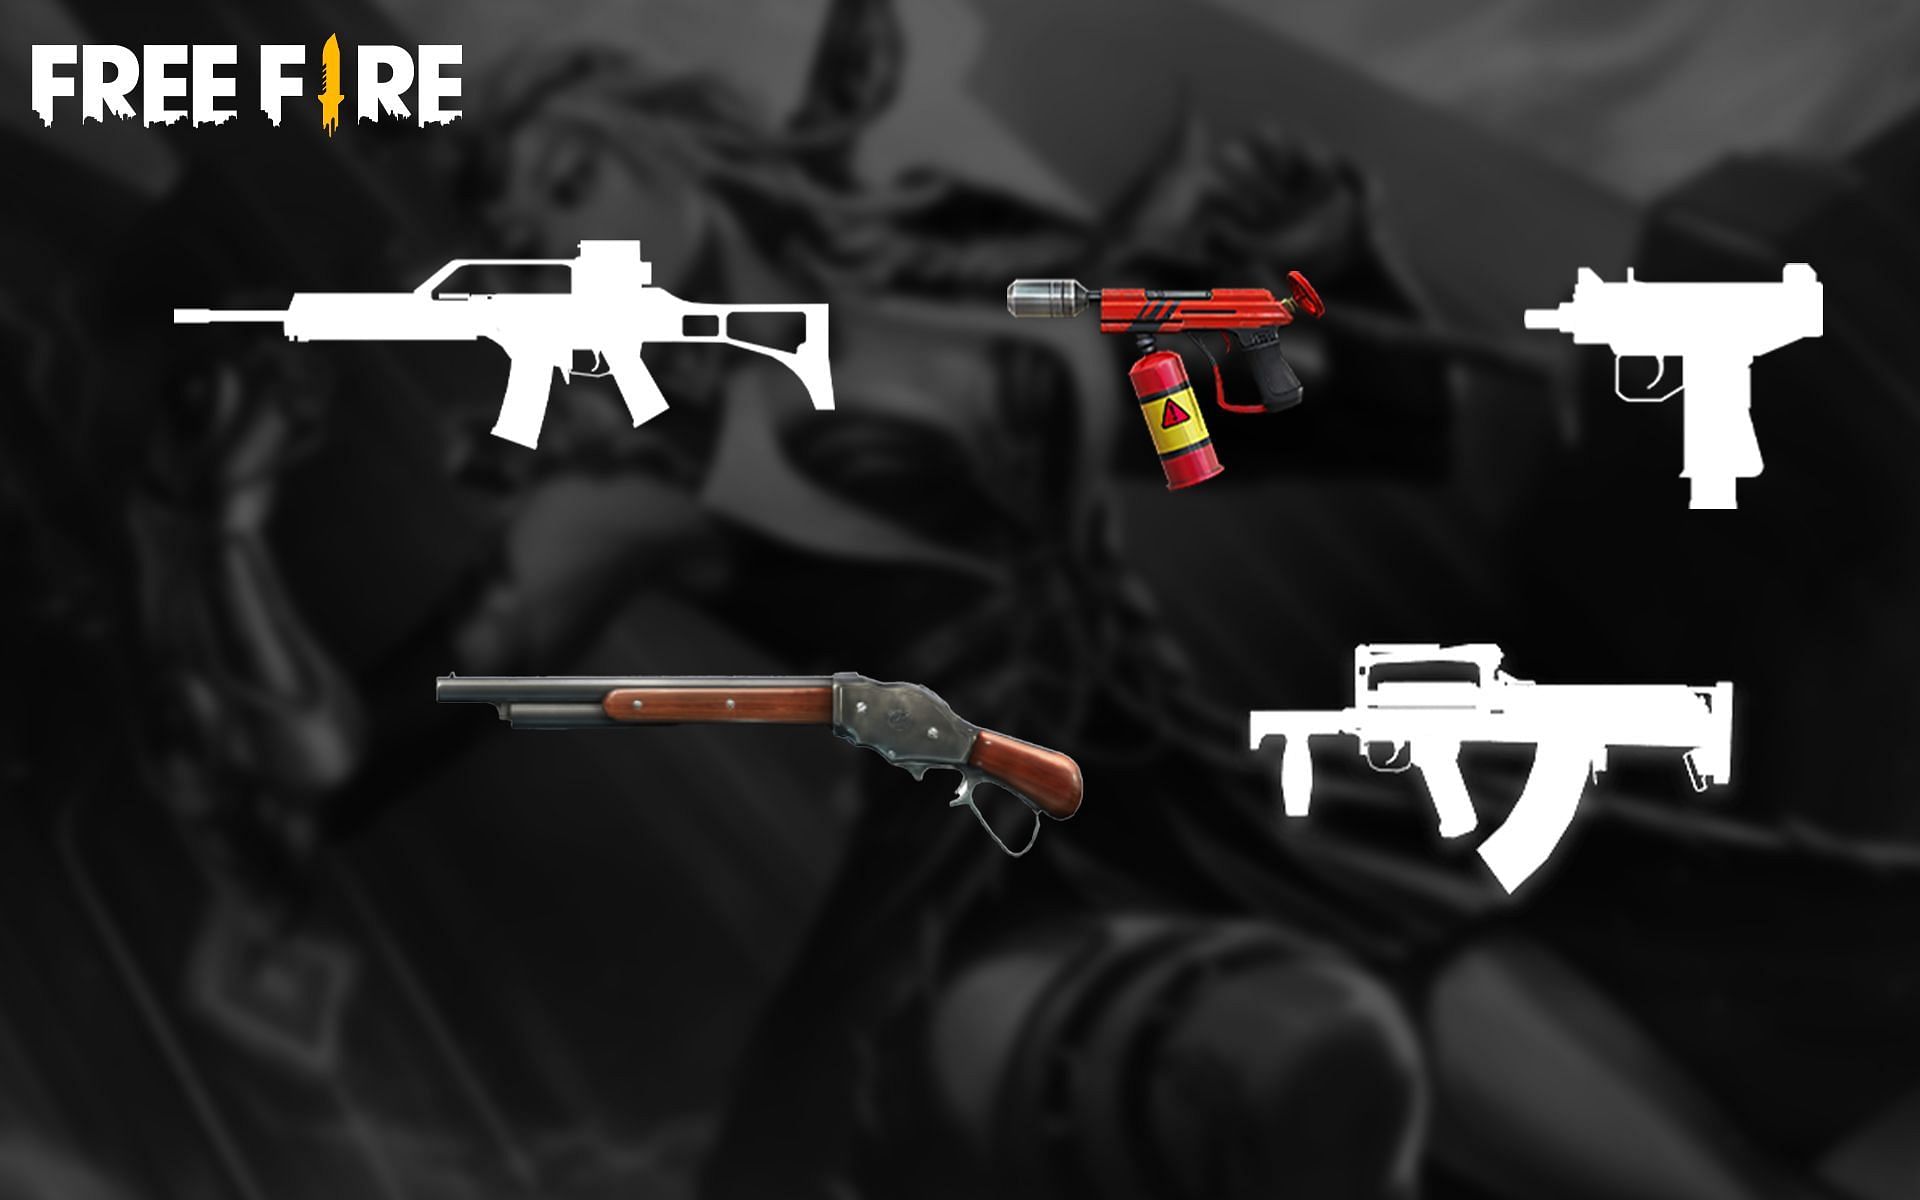 These weapons are some of the best choices for hot-drop fights in Free Fire (Image via Sportskeeda)